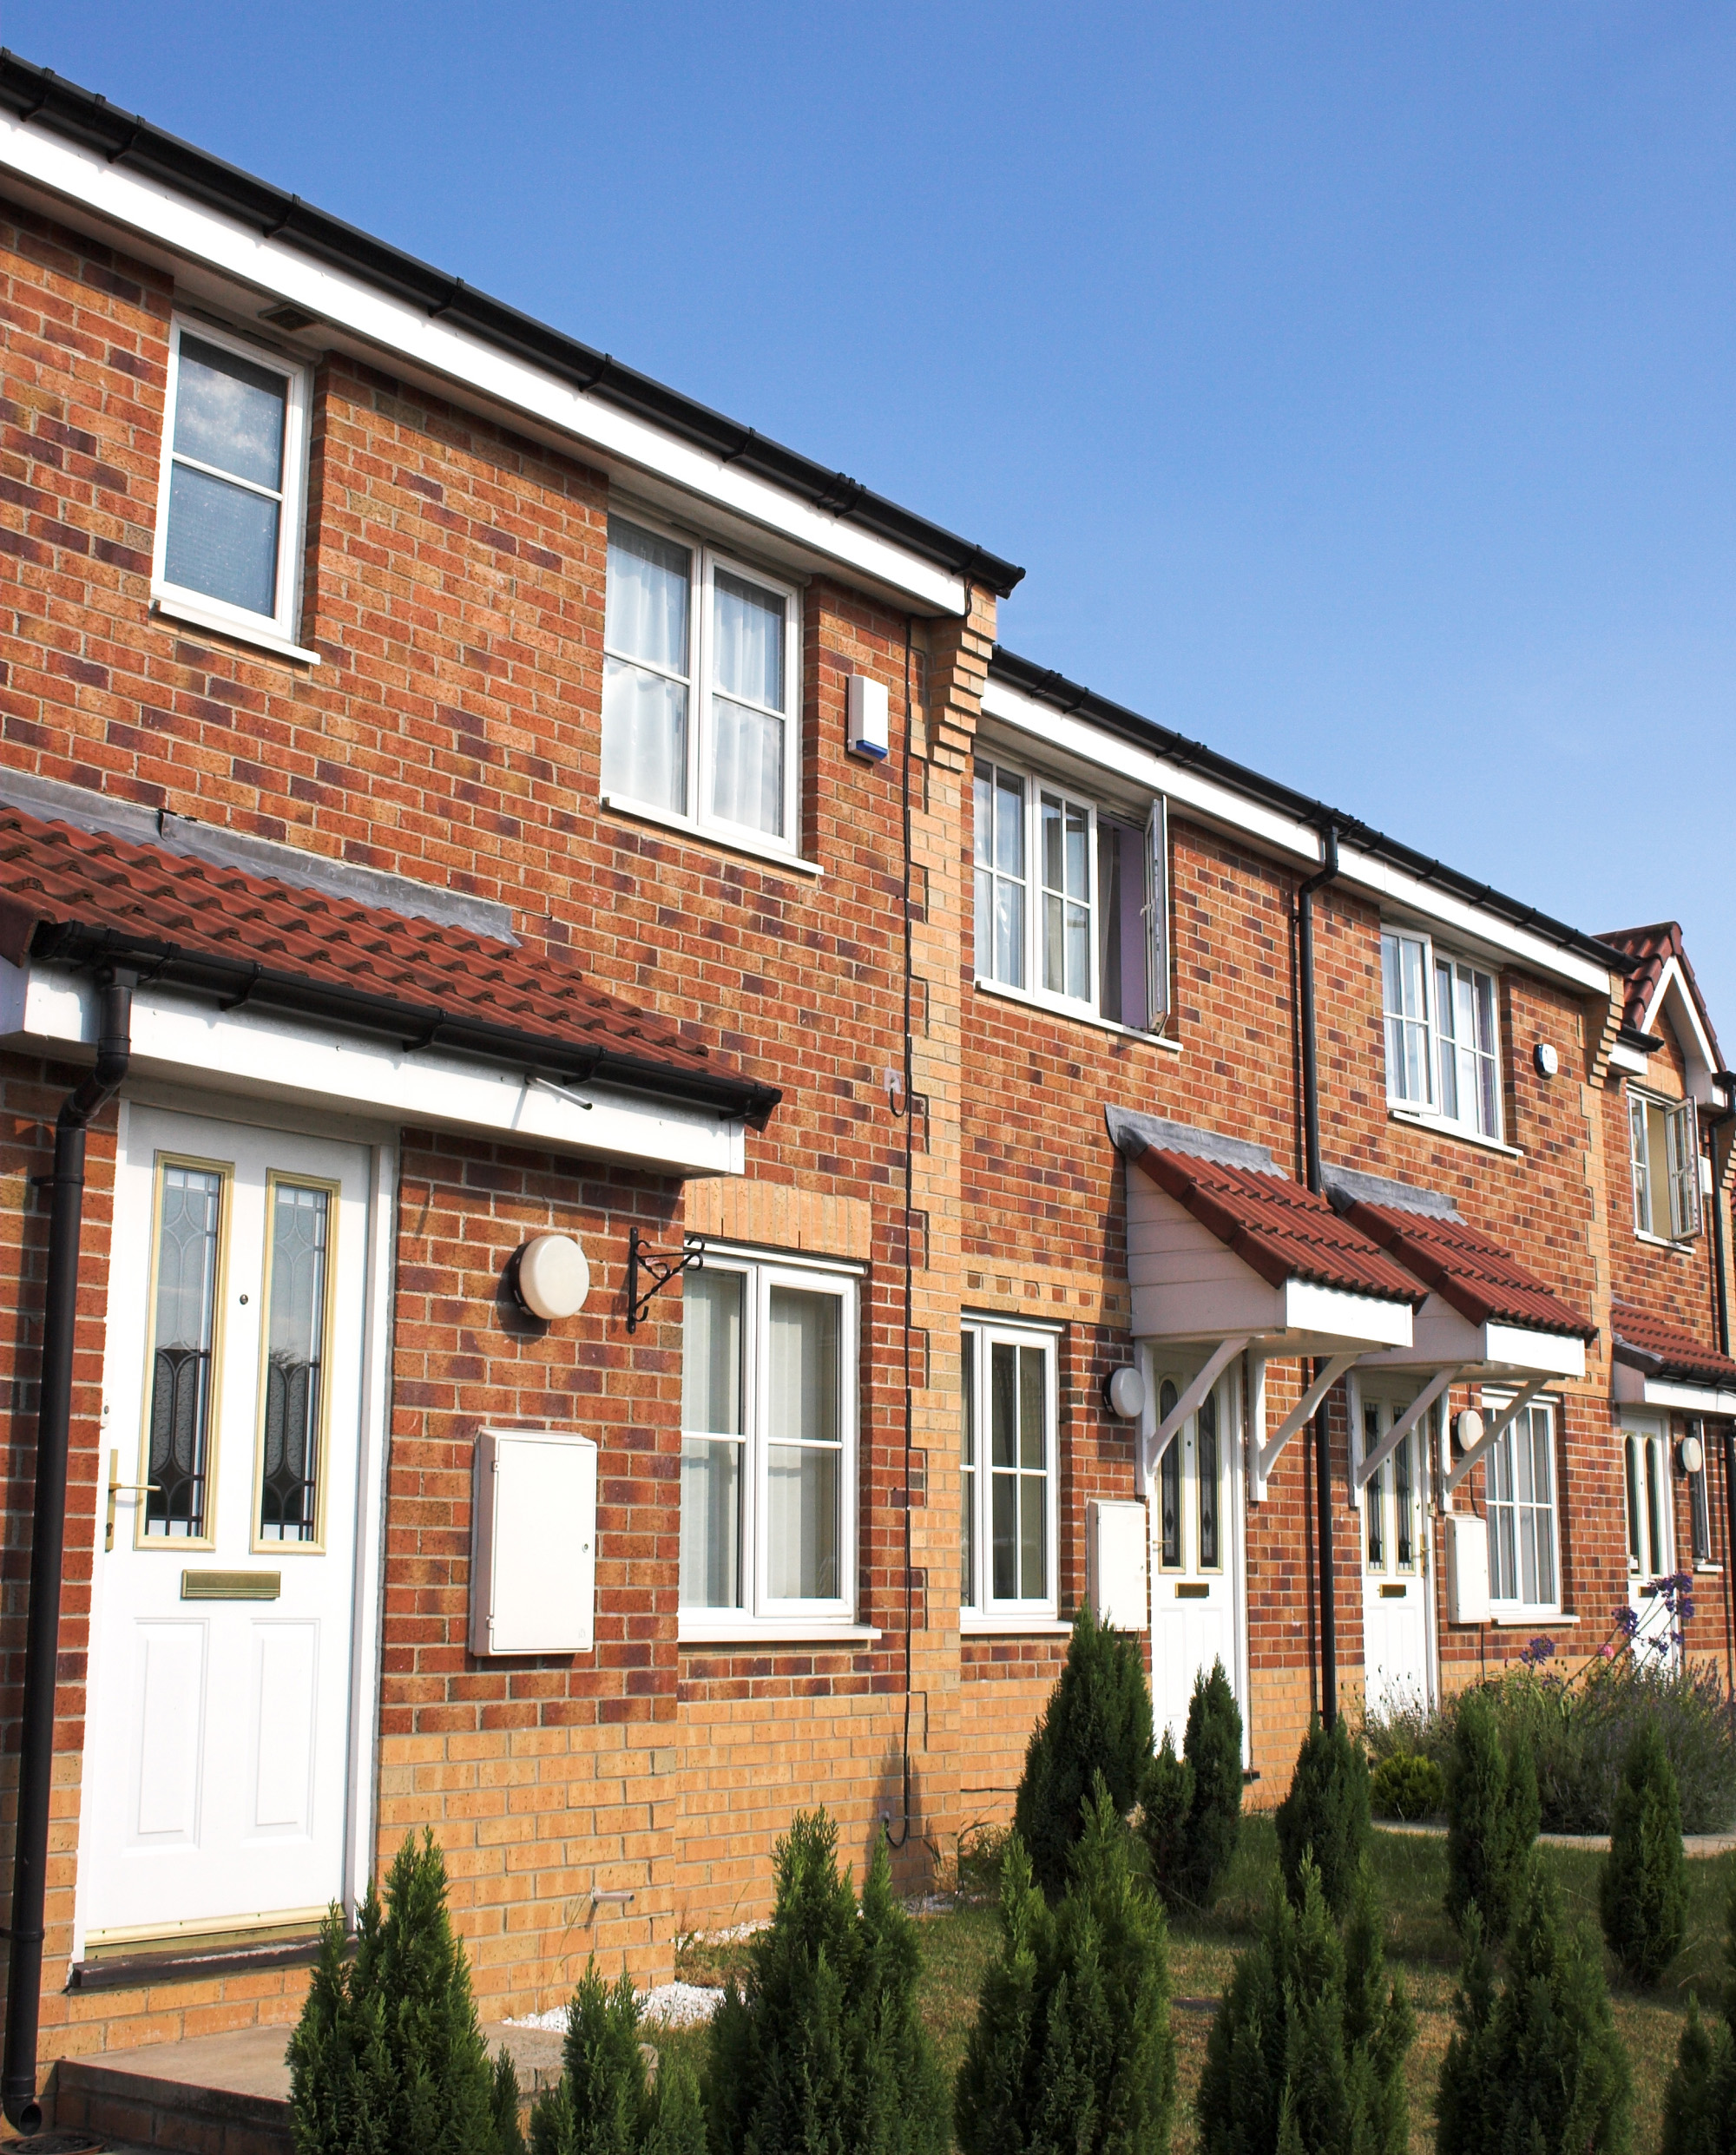 Stock rationalisation for housing associations